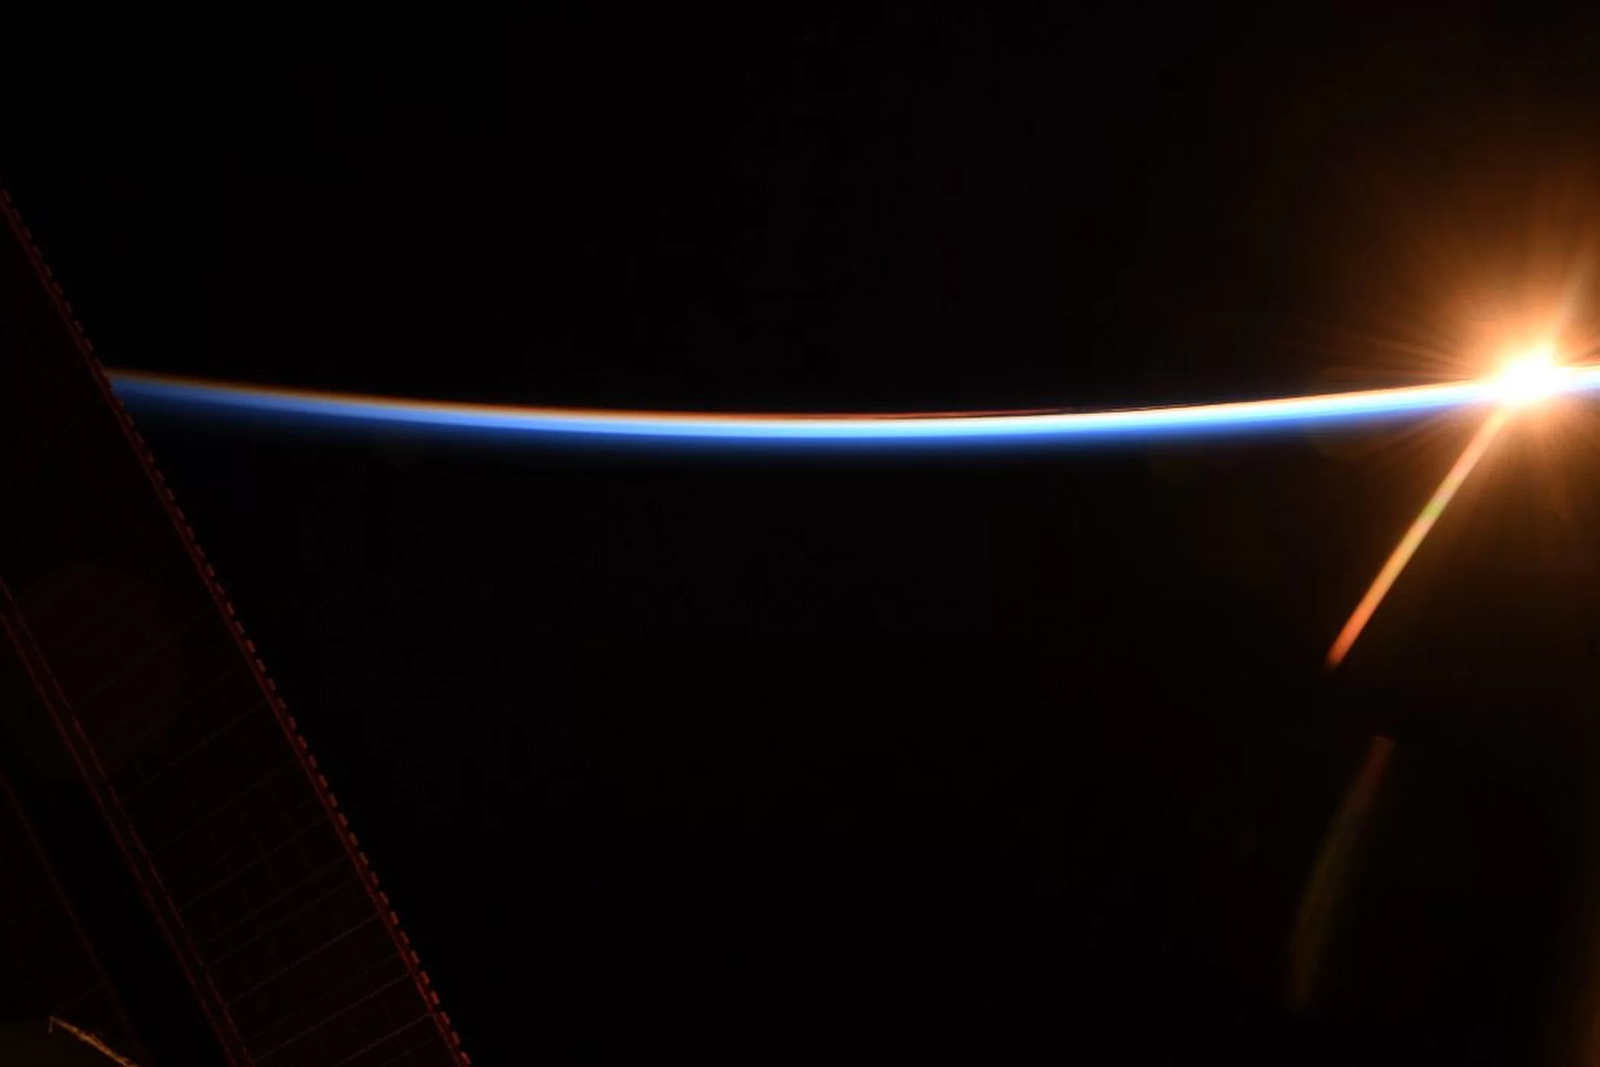 First dawn 2018 from the ISS - Space, ISS, The photo, dawn, 2018, Interesting, New Year, Wallpaper